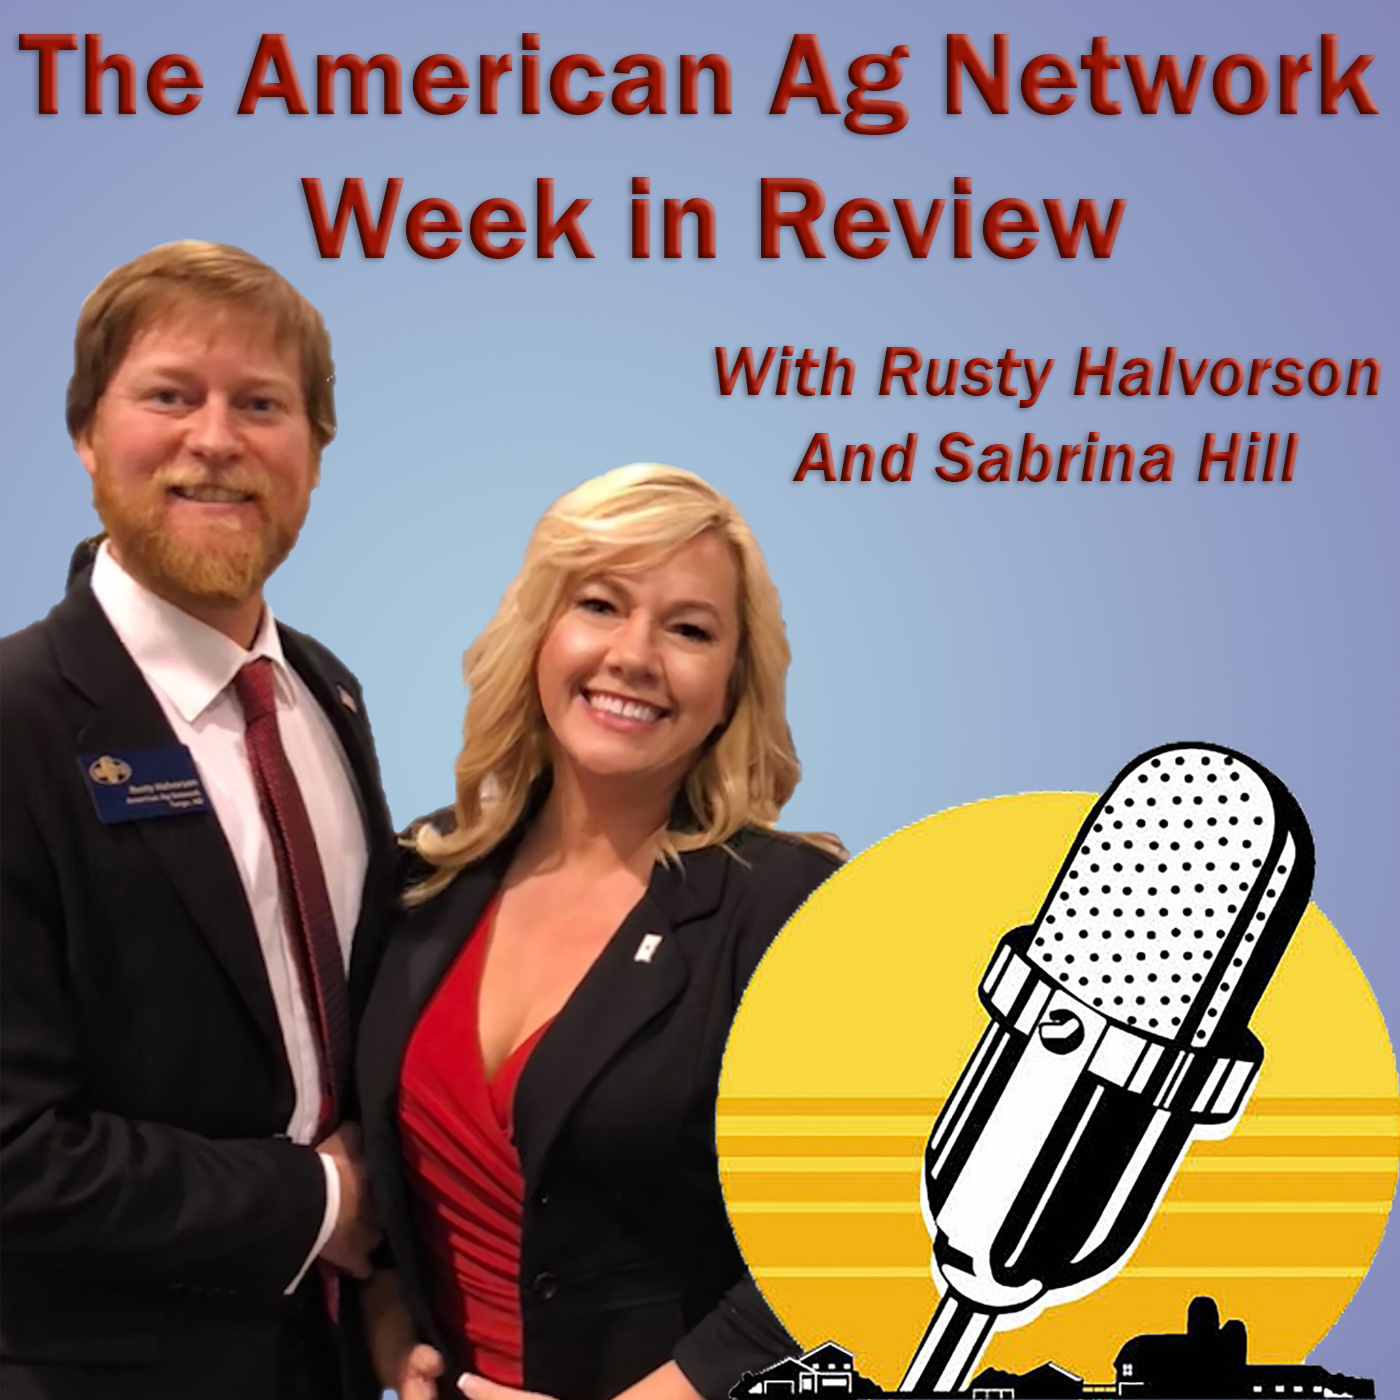 Podcast: Scott Pruitt & EPA Waivers, ARC Program Proposed Changes, United Soybean Board, and more